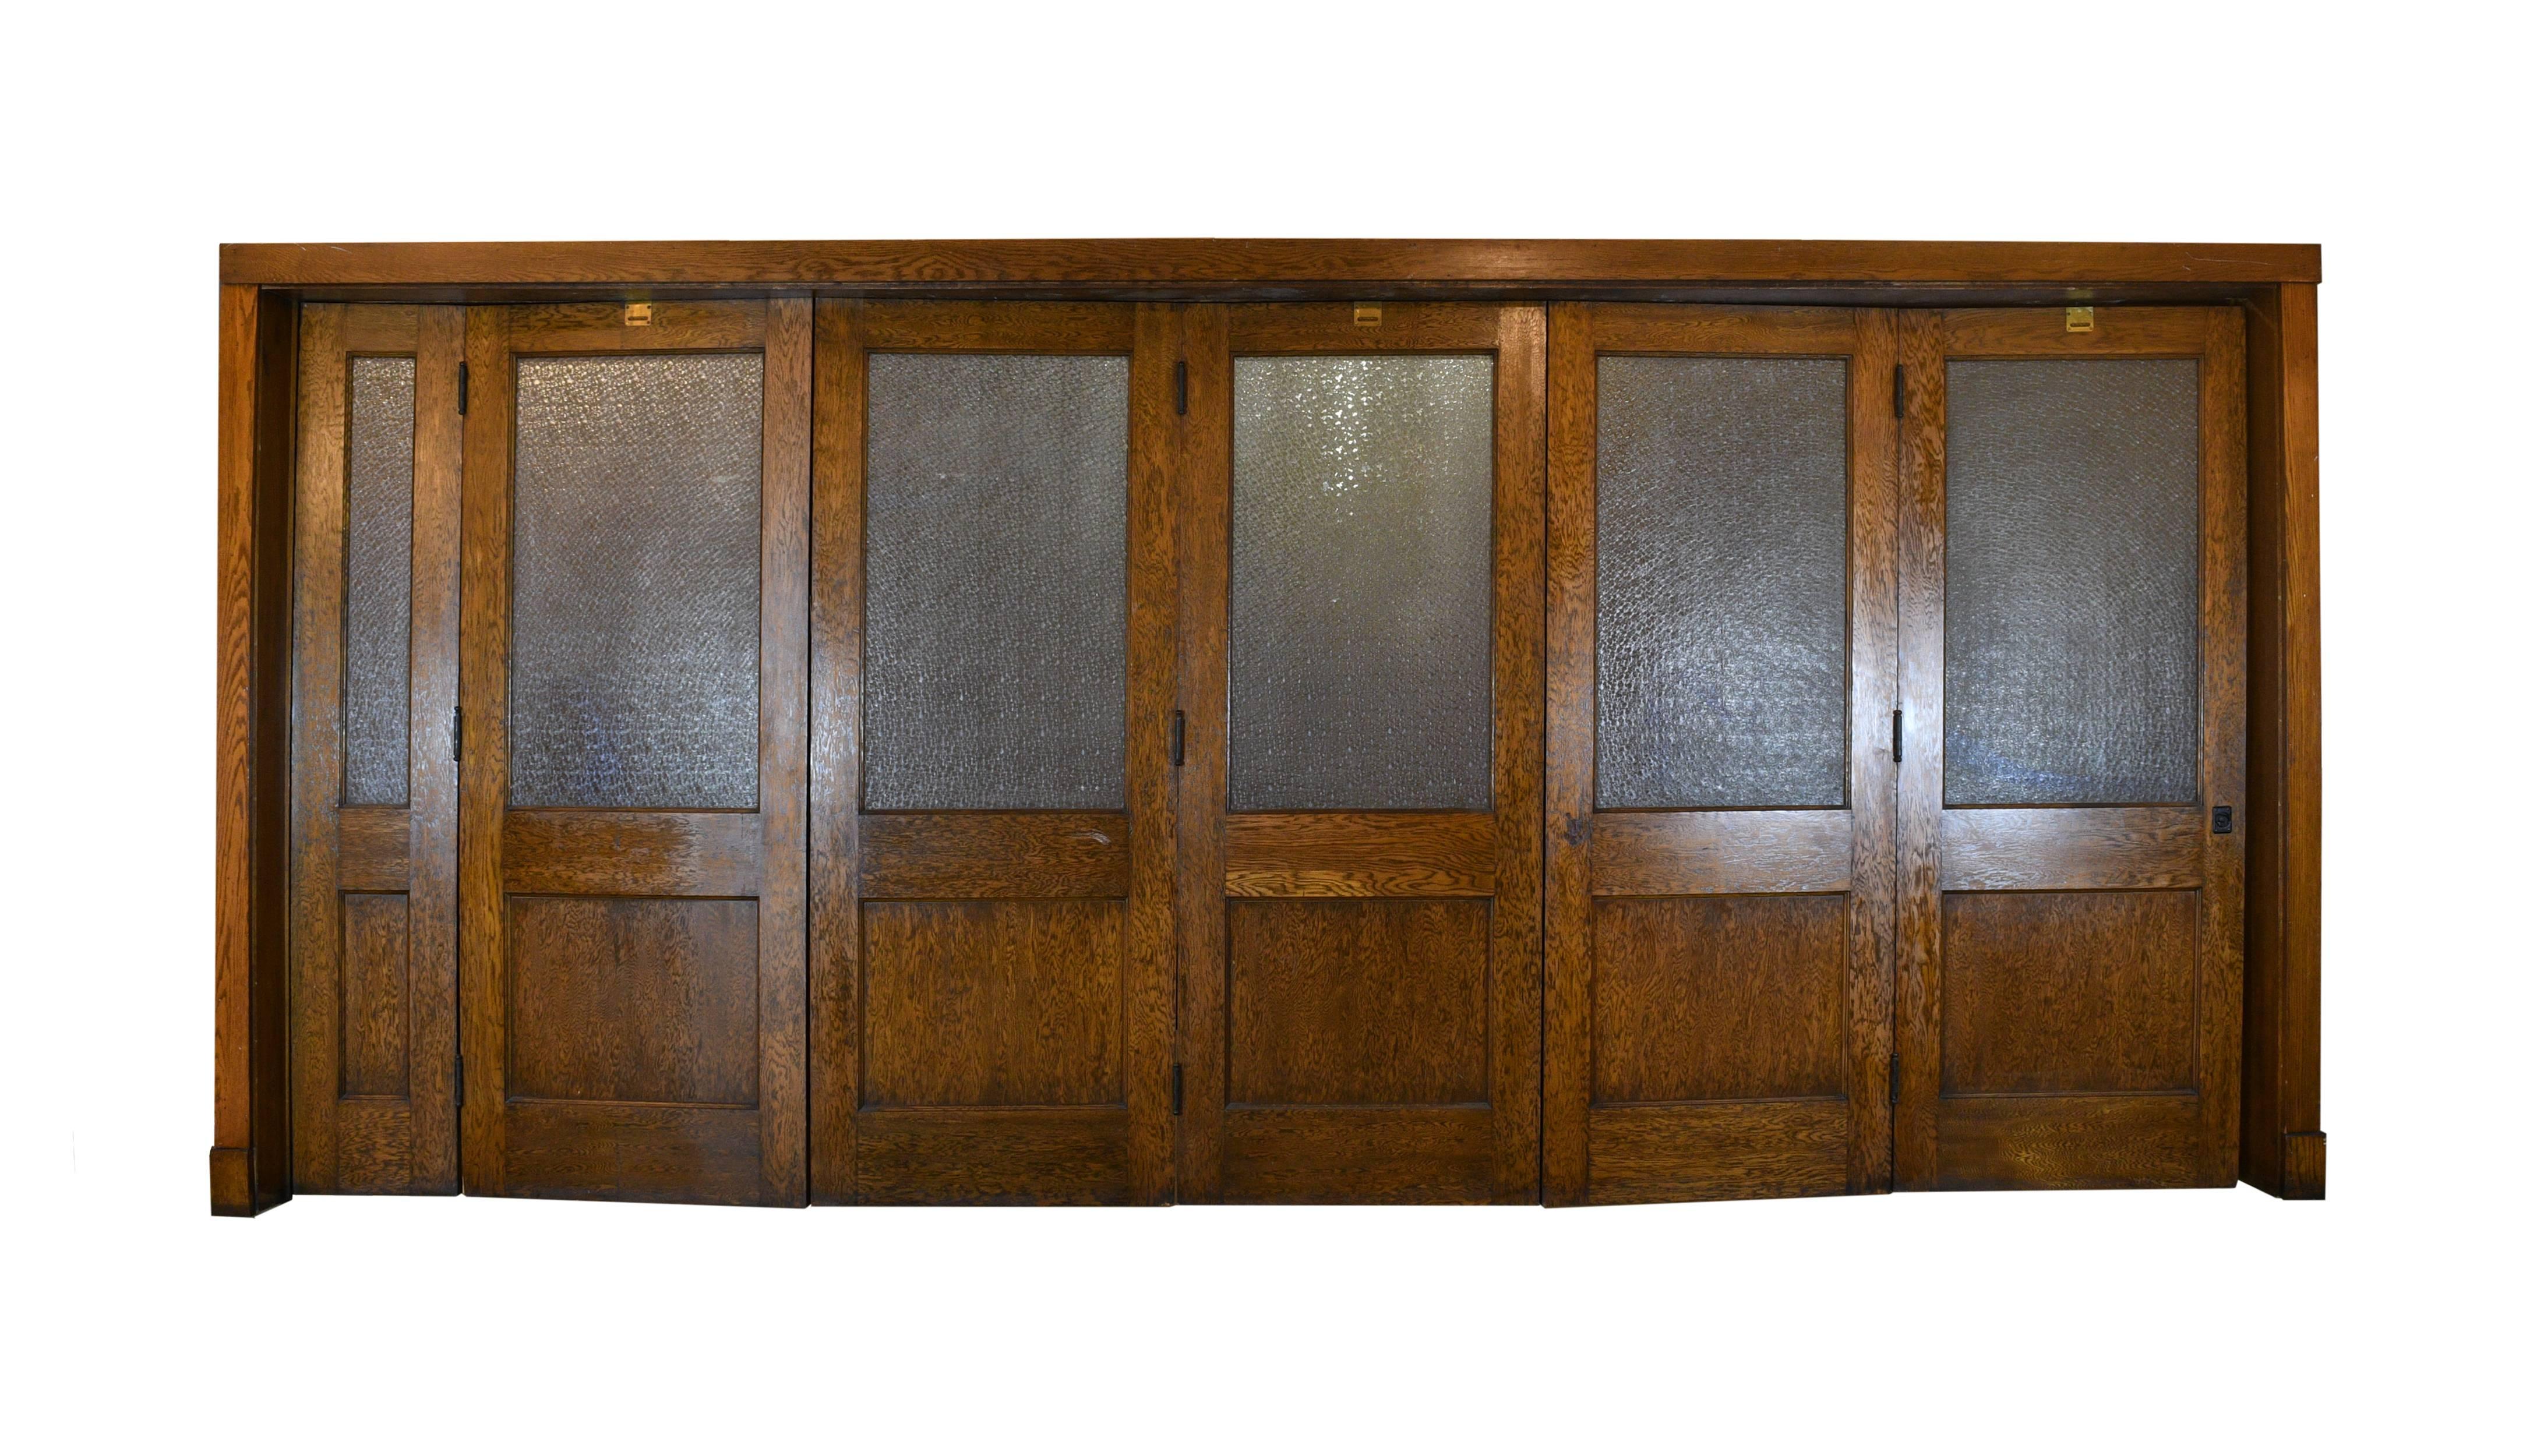 This huge set of bi-fold doors is from a school in Youngstown, Ohio. Both the wood and the textured, snowflake glass are kept with care and every part of the door functions extremely well. When closed, the glass allows light to go through while at